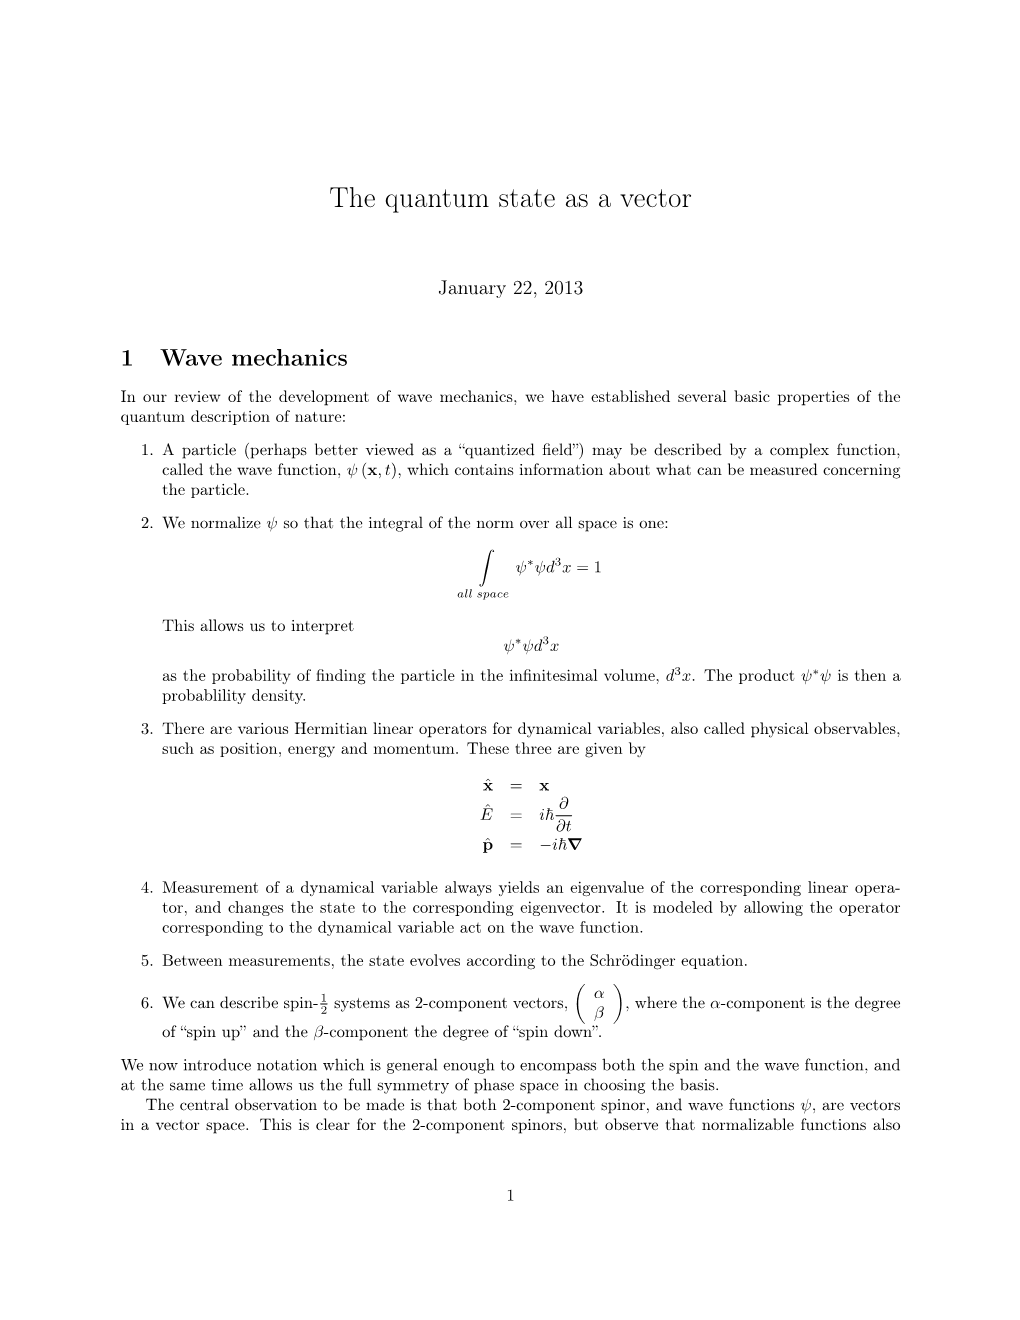 The Quantum State As a Vector